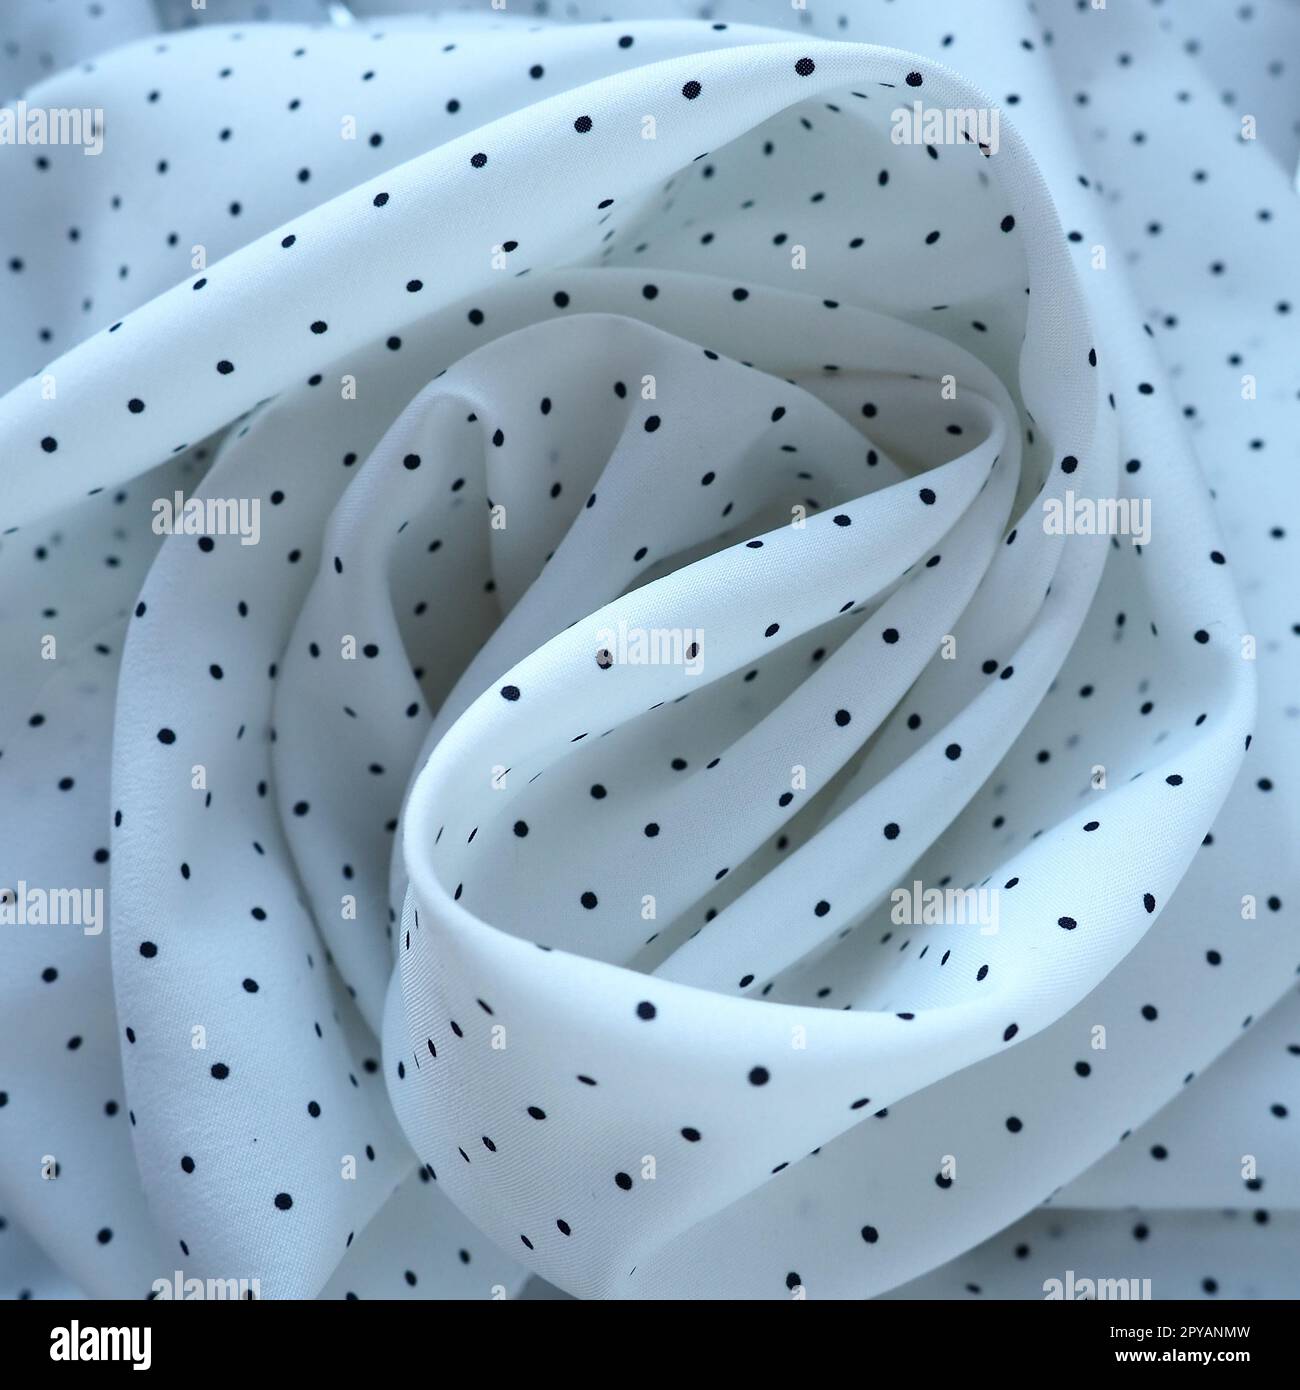 Texture of silk fabric. Black polka dots on a white background. Dress lightweight synthetic fabric in white with a repeating pattern. The textile is made up of waves and folds. Feminine classic style. Stock Photo